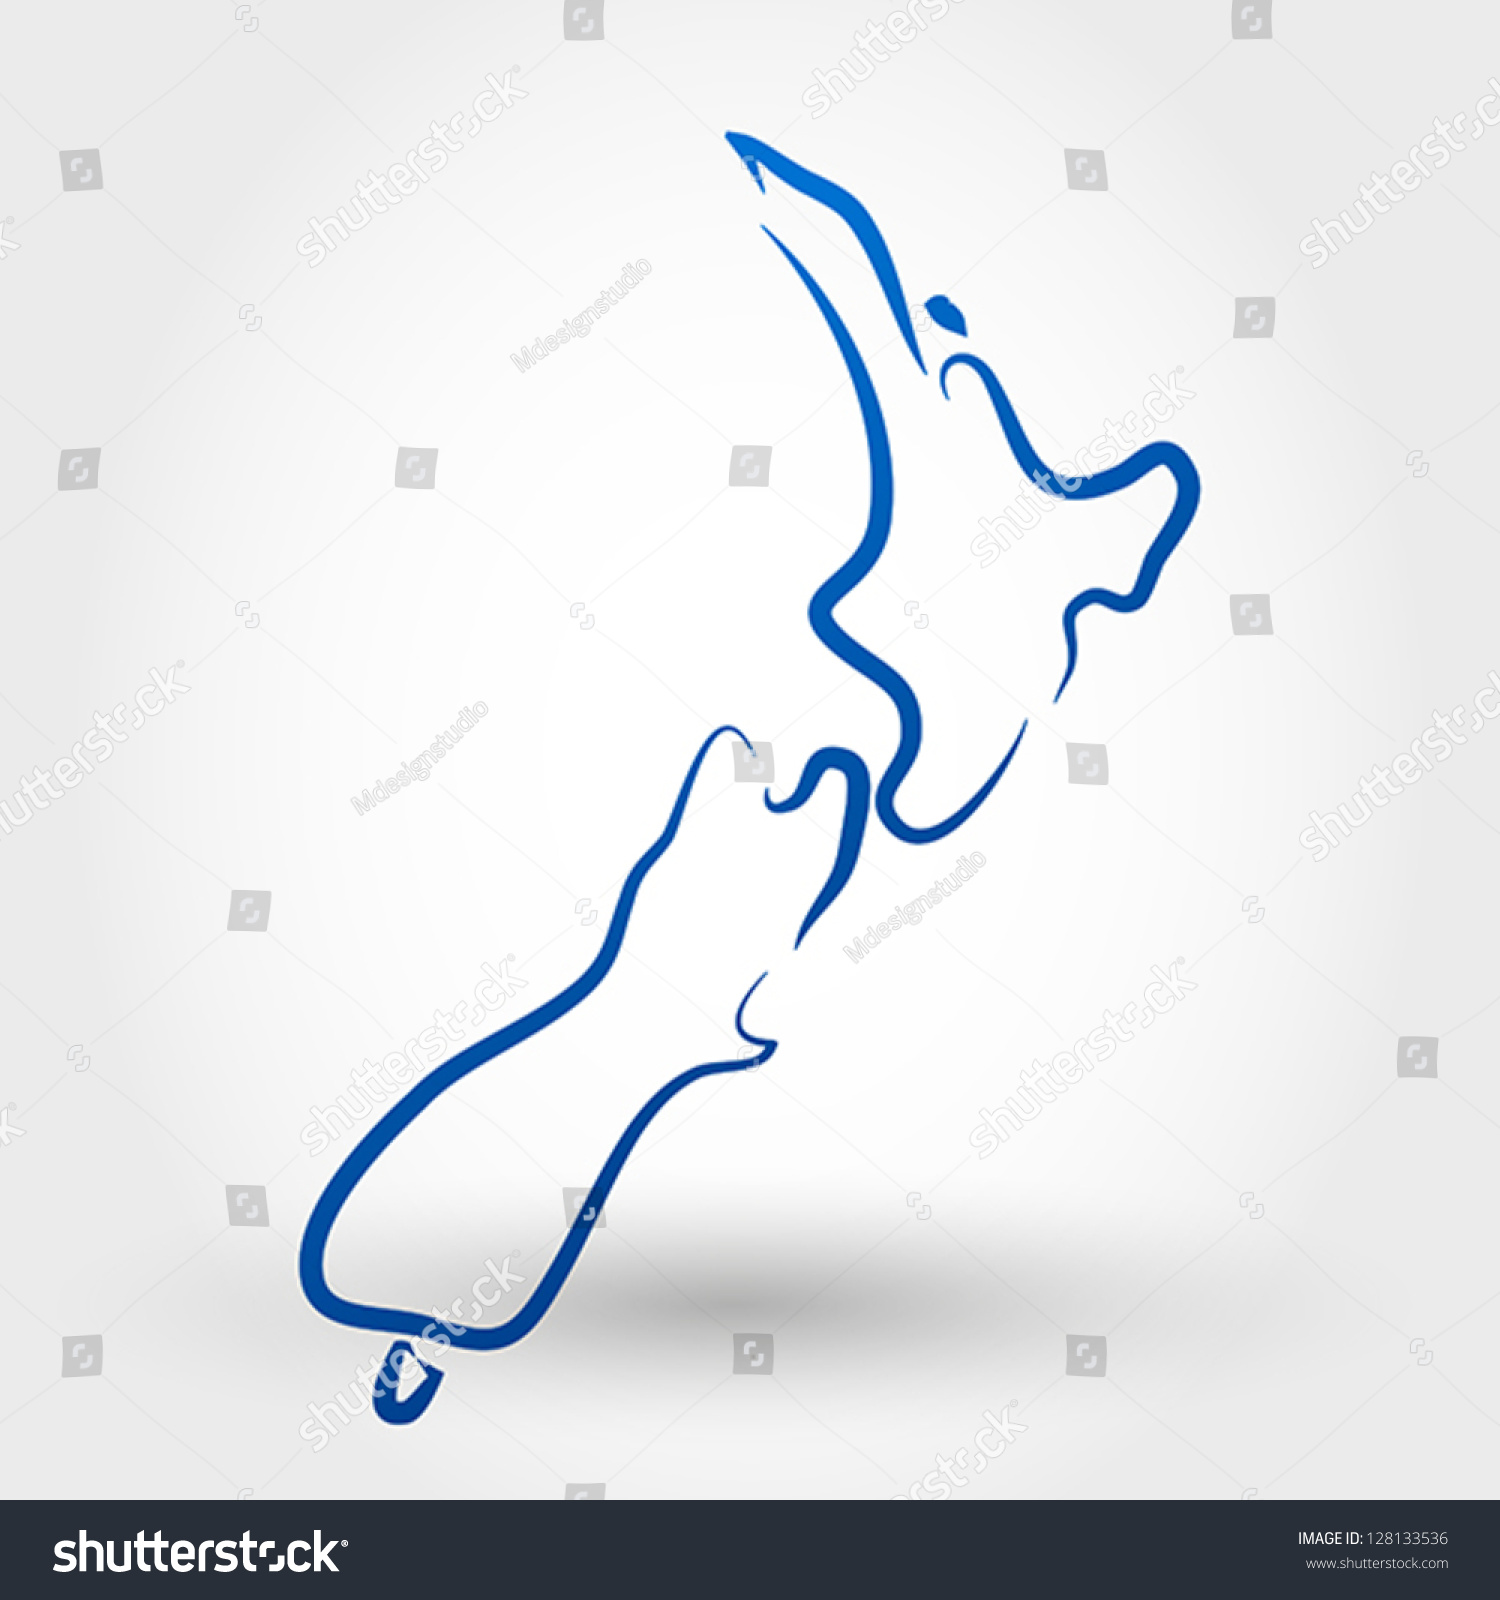 clipart map of new zealand - photo #17